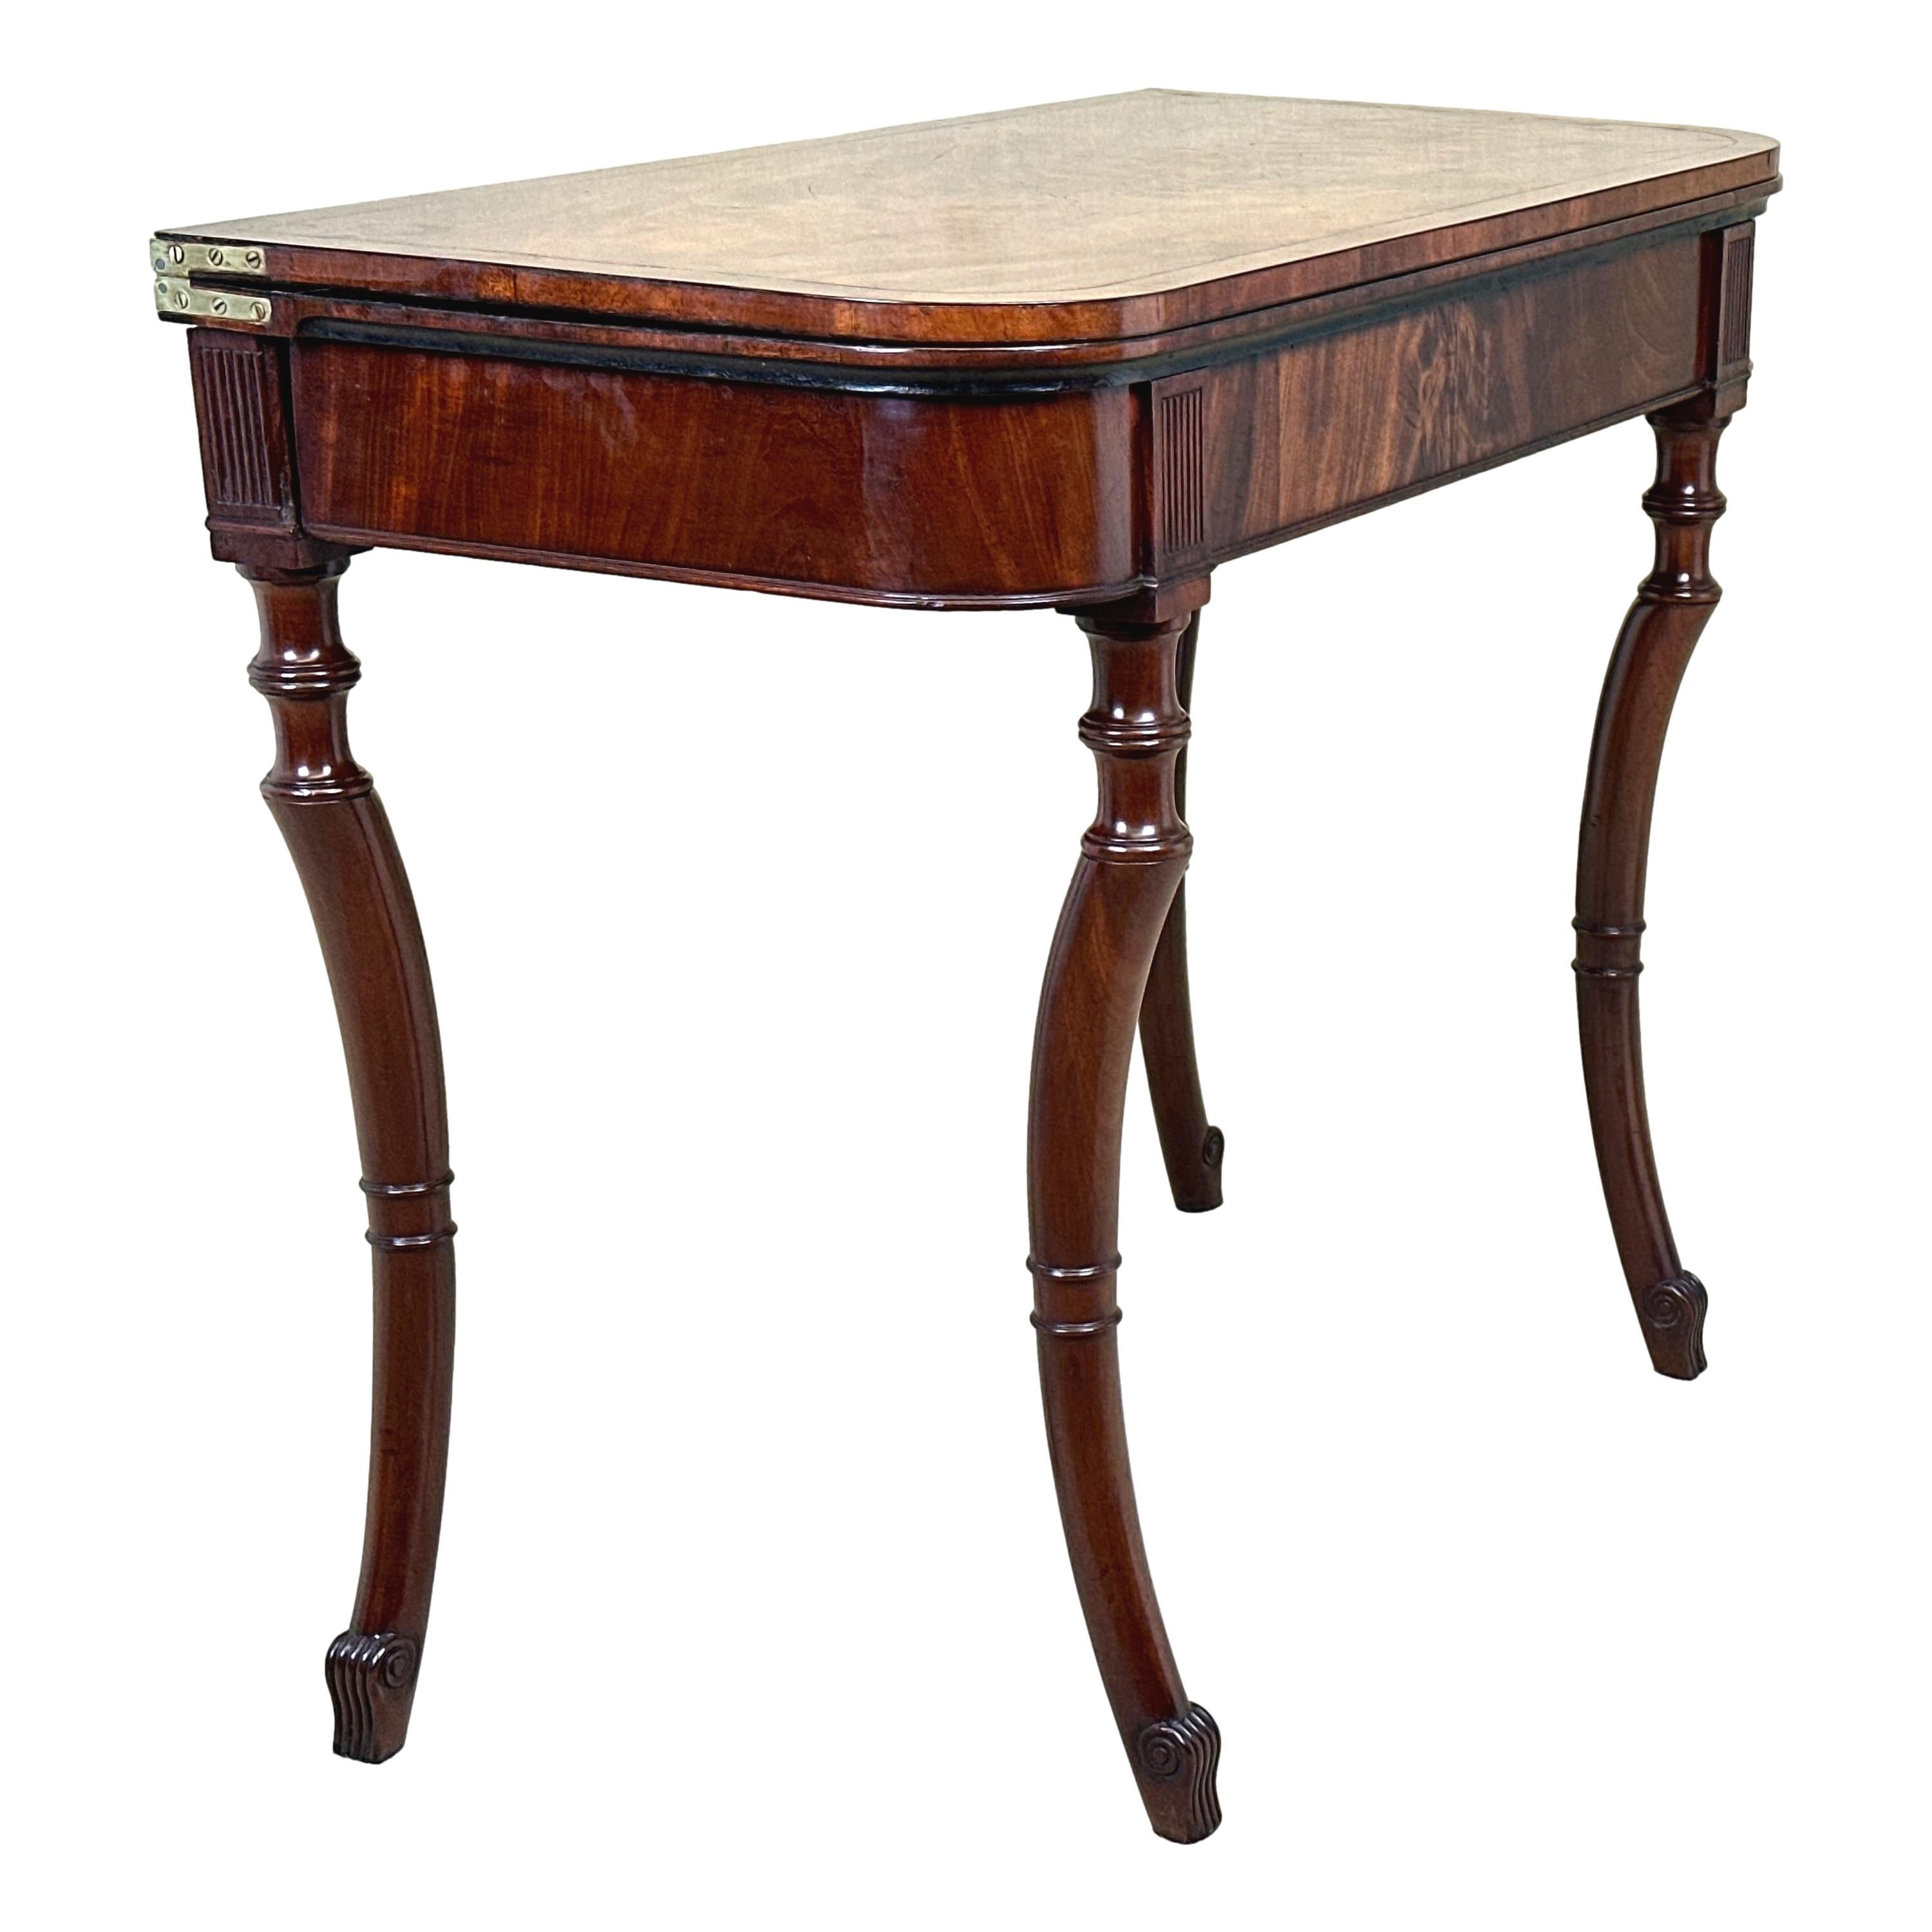 A Very Good Quality 19th Century, Regency Period Mahogany Tea Table, Having Superbly Figured Foldover Top With Banded Decoration And Well Figured Interior Retaining Good Surface And Patina, Above Elegantly Figured Frieze With Matchstick Fluted